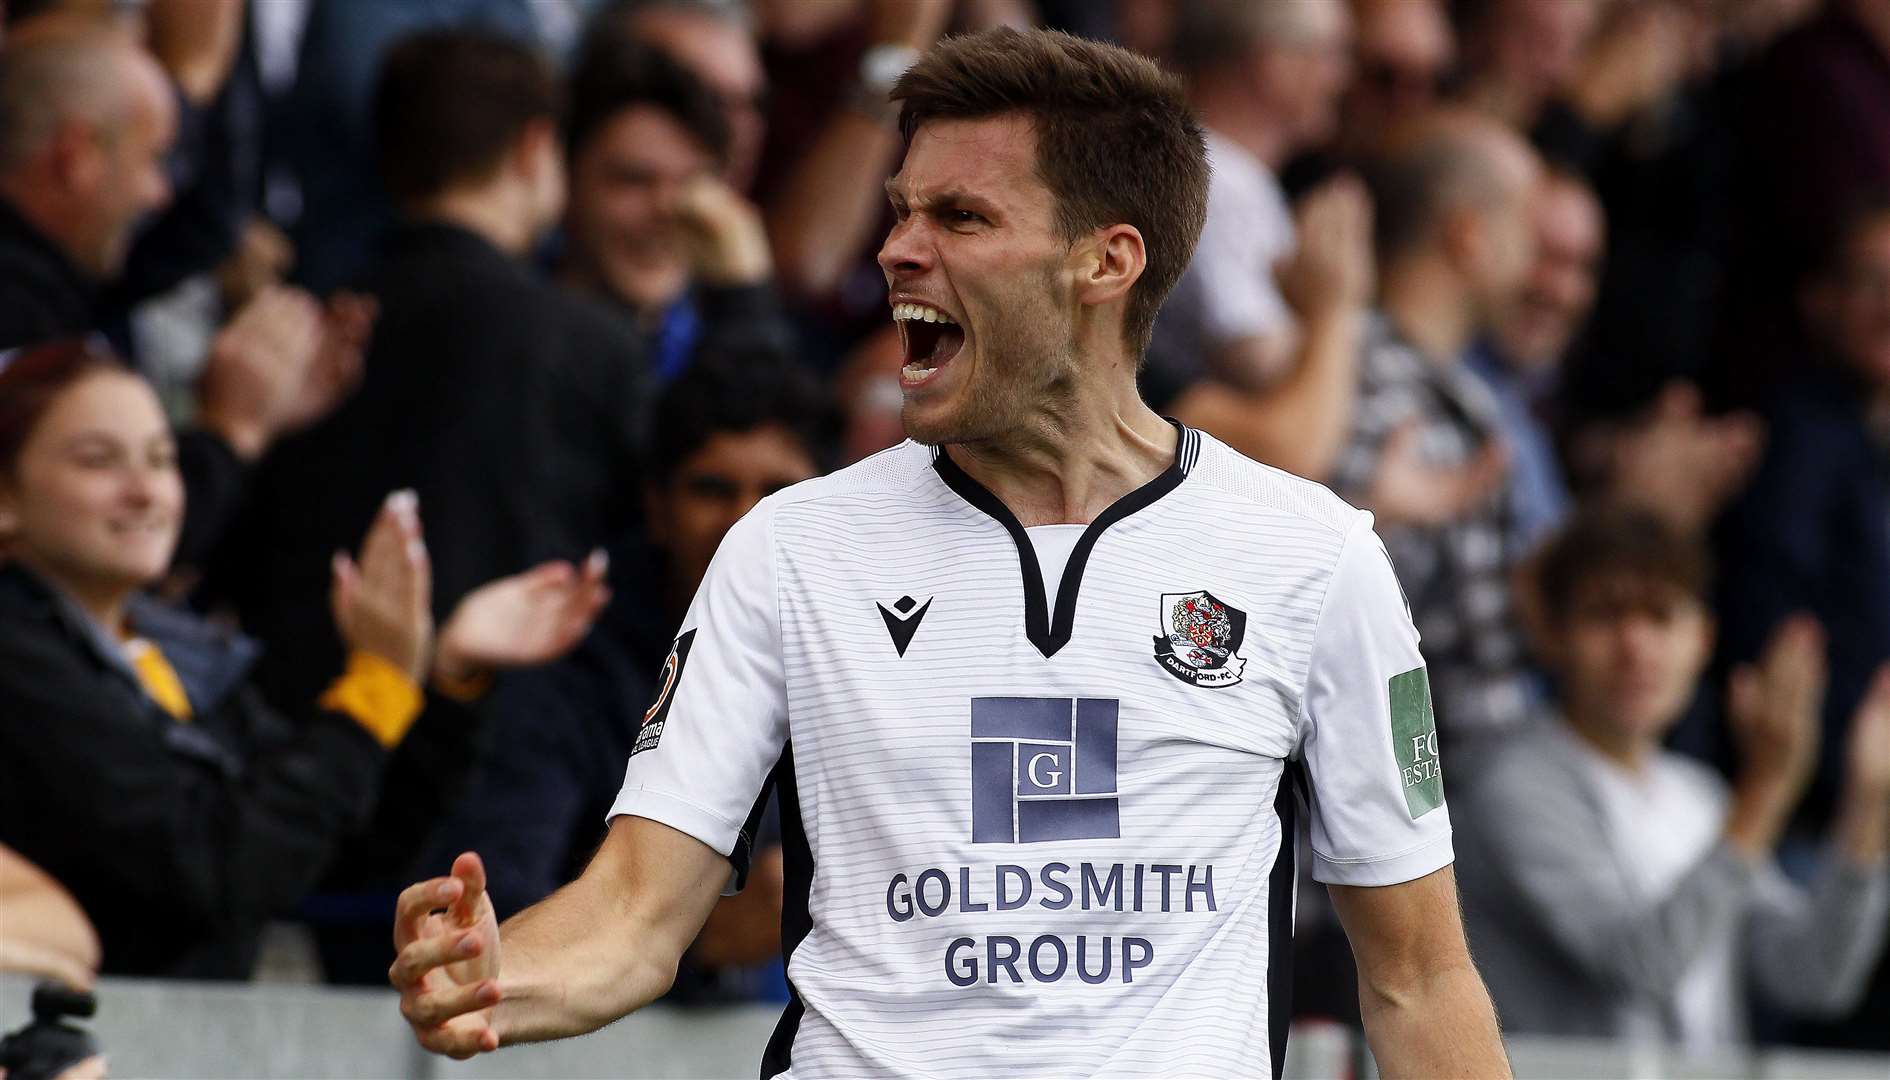 Charlie Sheringham scored twice for Dartford on Sunday to put them in charge of the play-off match